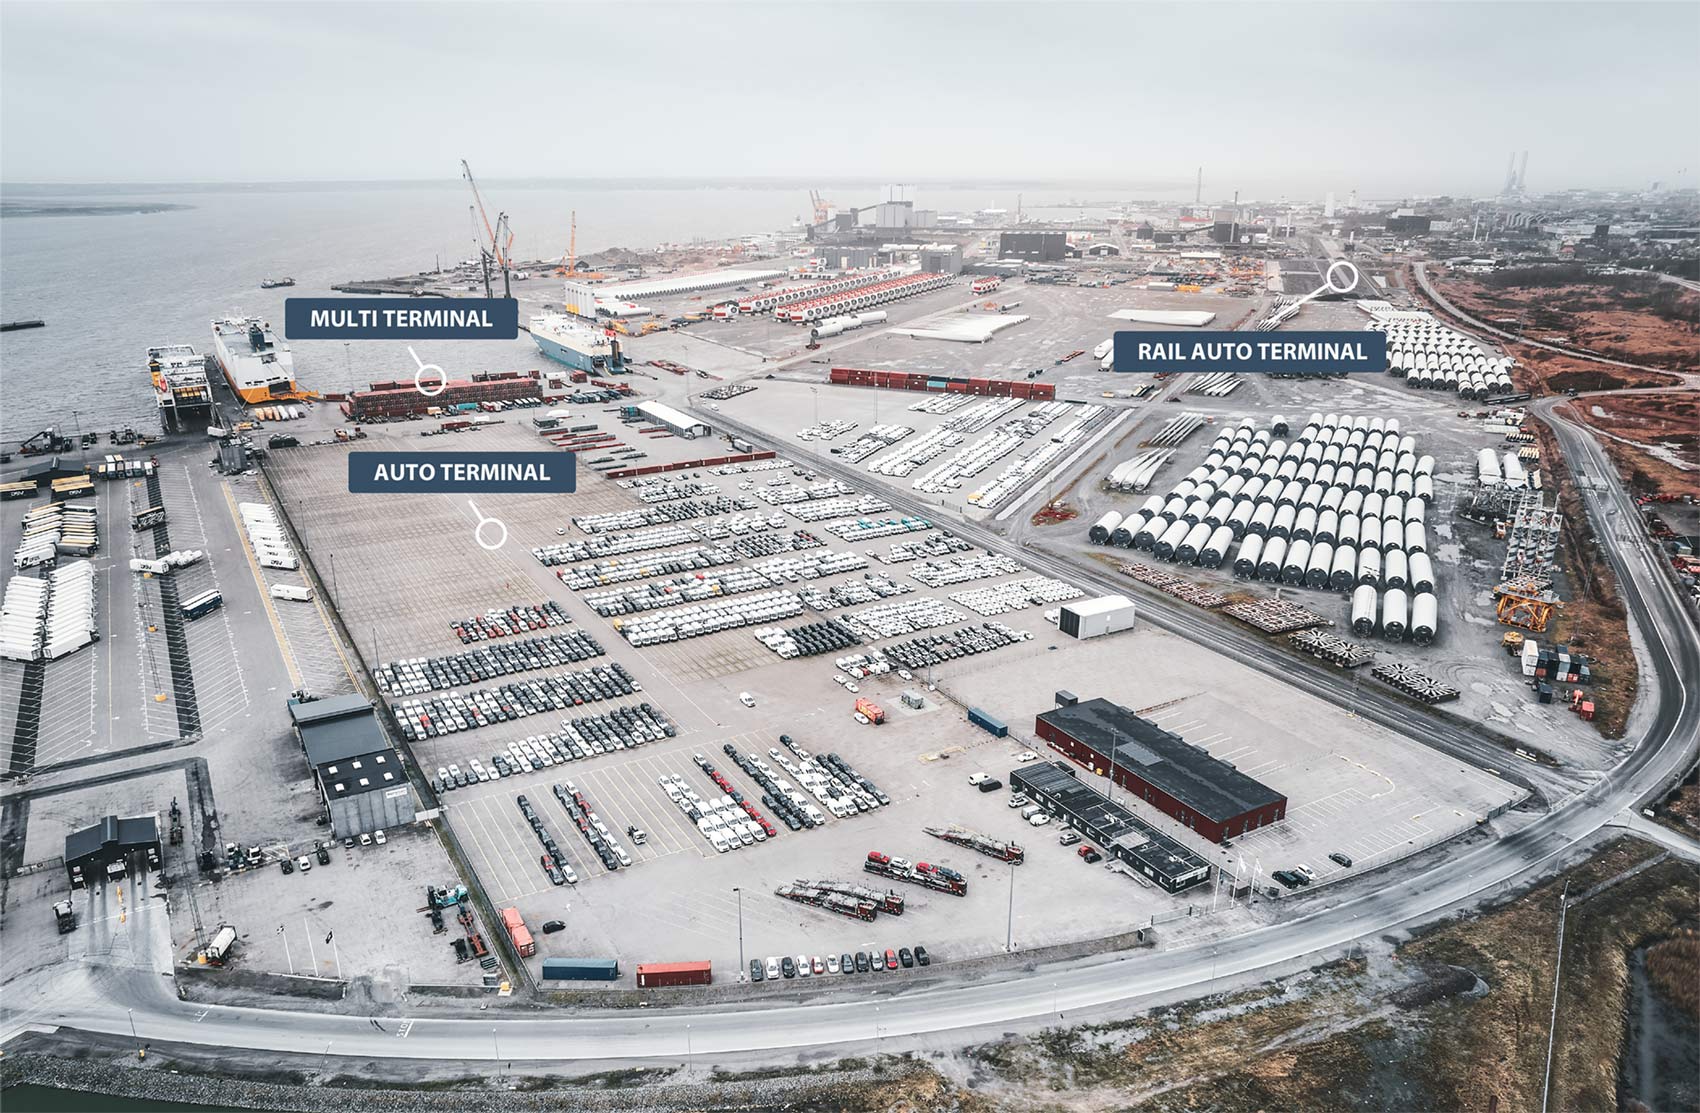 Drone still of SAL's three terminals, showcasing ongoing work on the new 835-meter double tracks, the entire auto terminal, and the multi-terminal with wind turbine components. The quay area, with three ships docked at the RoRo ramps, is also visible.